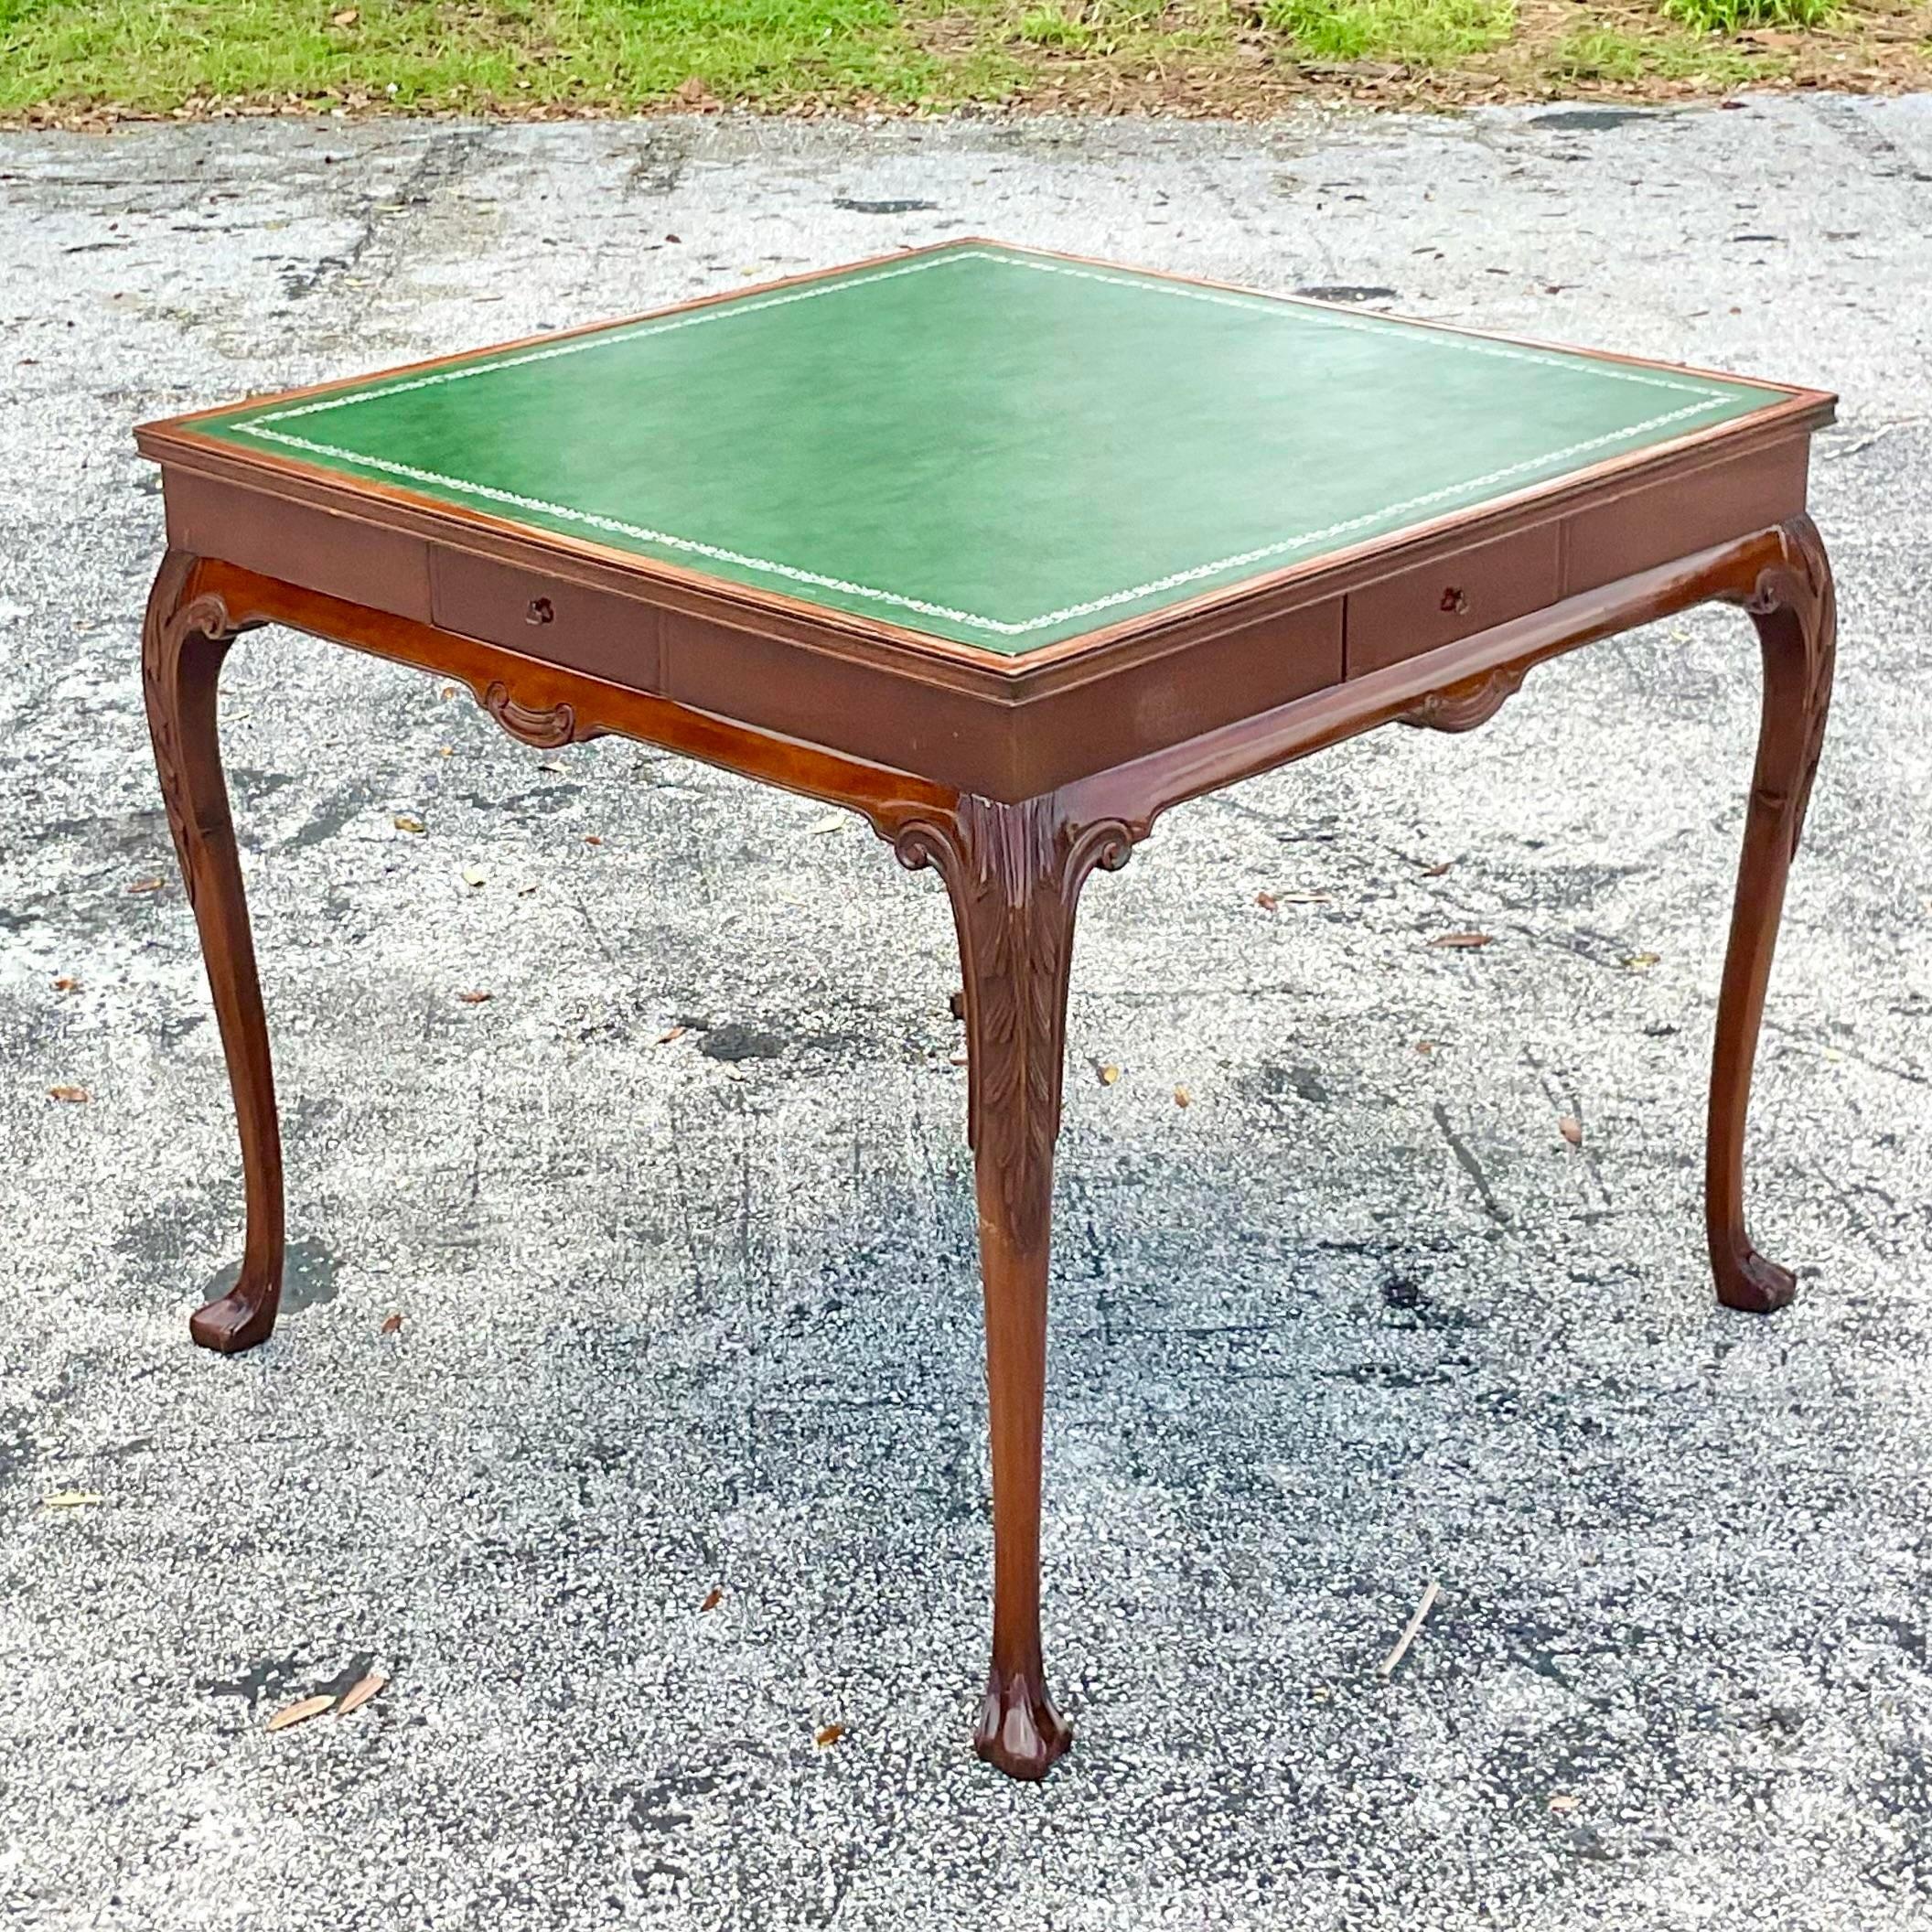 A fabulous vintage Regency game table. A chic Hunter green leather top with hand tooled silver leaf embossing. Hand carved detail on Cabriolet legs. Acquired from a Palm Beach estate.